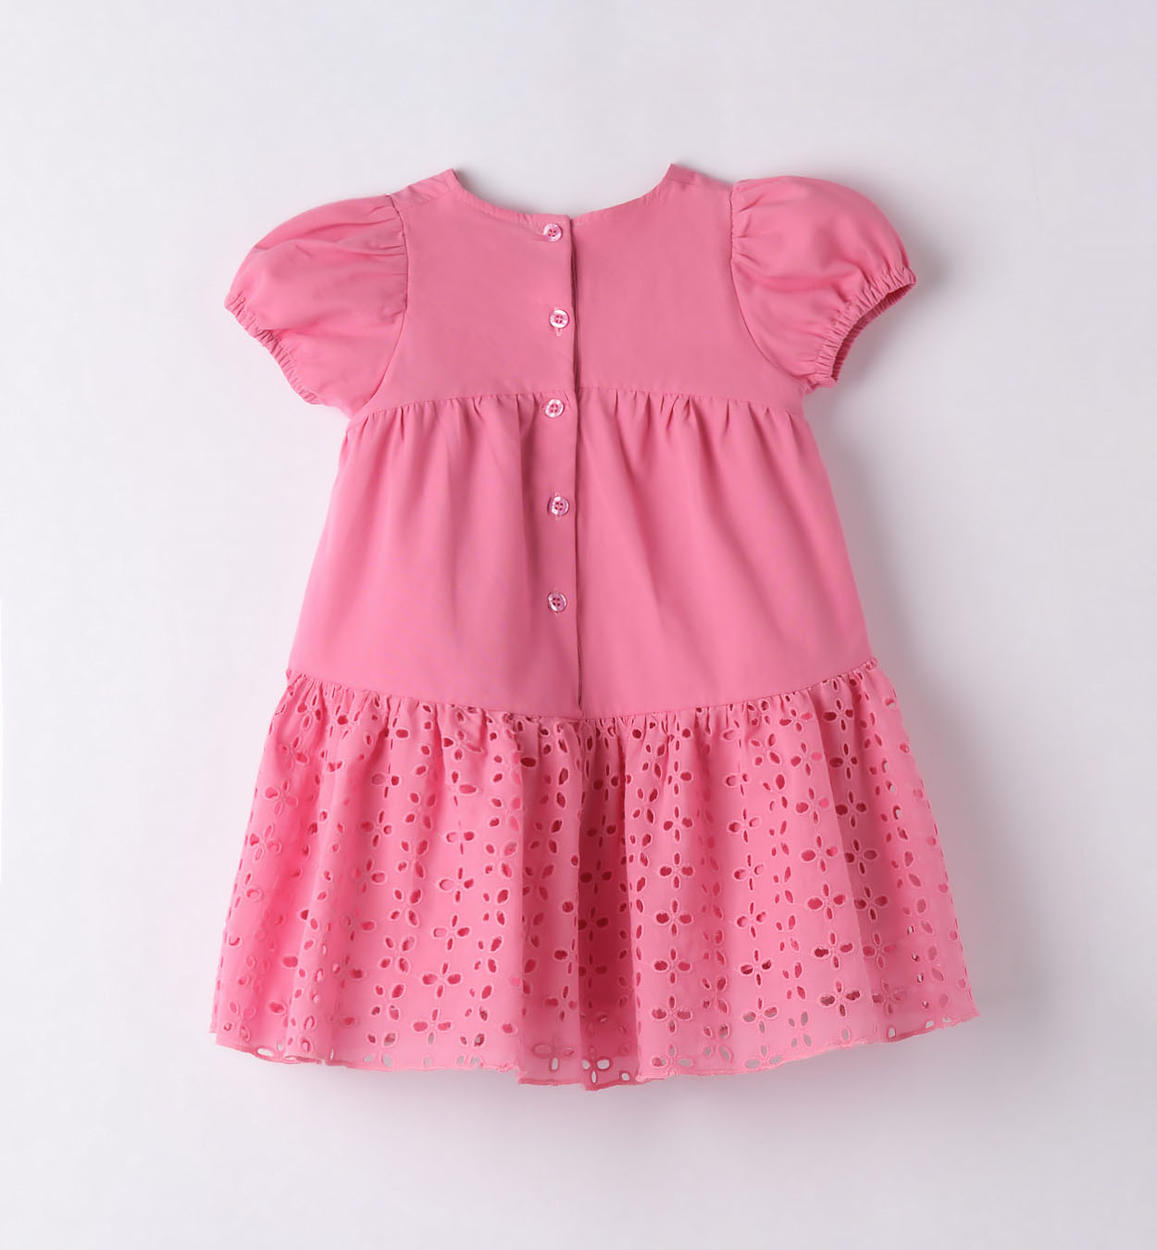 iDO broderie anglaise dress for girls from 9 months to 8 years | iDO